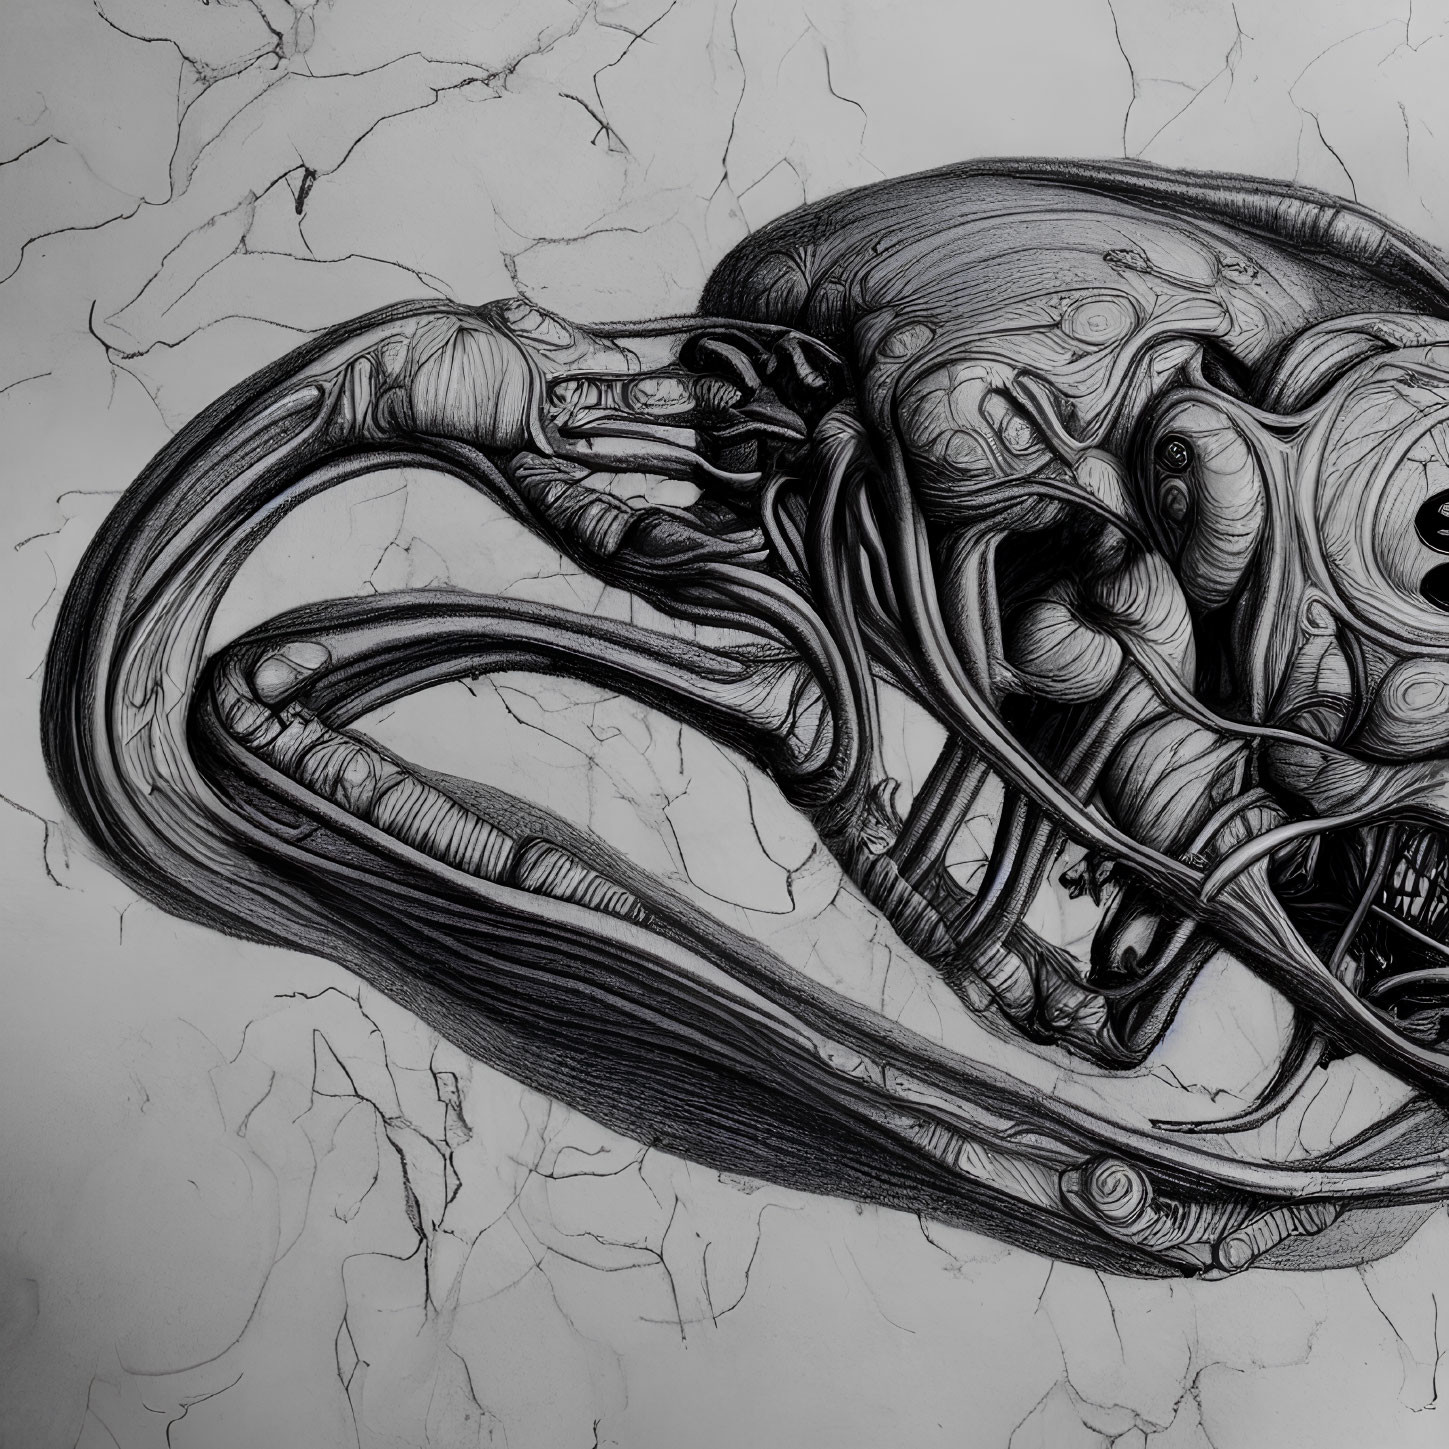 Detailed Monochromatic Biomechanical Creature Drawing on Cracked Surface